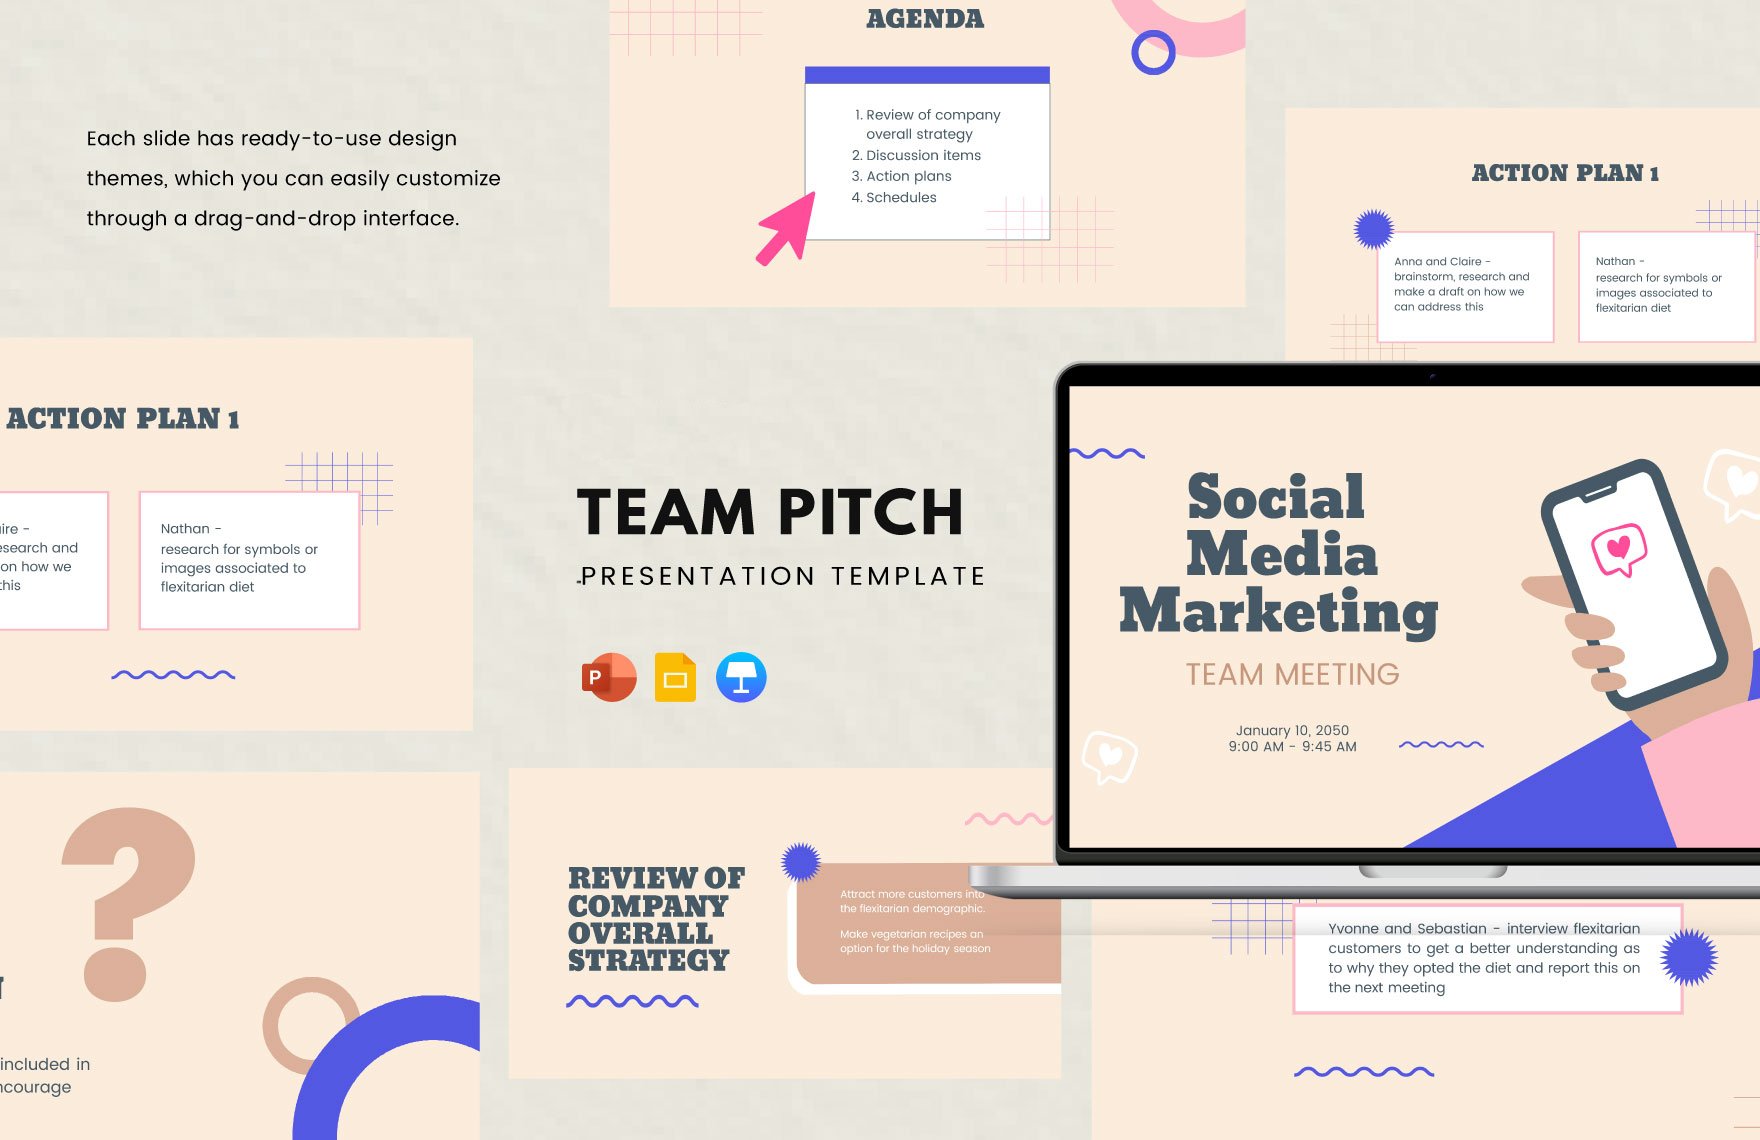 Free Team Pitch Template in PowerPoint, Google Slides, Apple Keynote